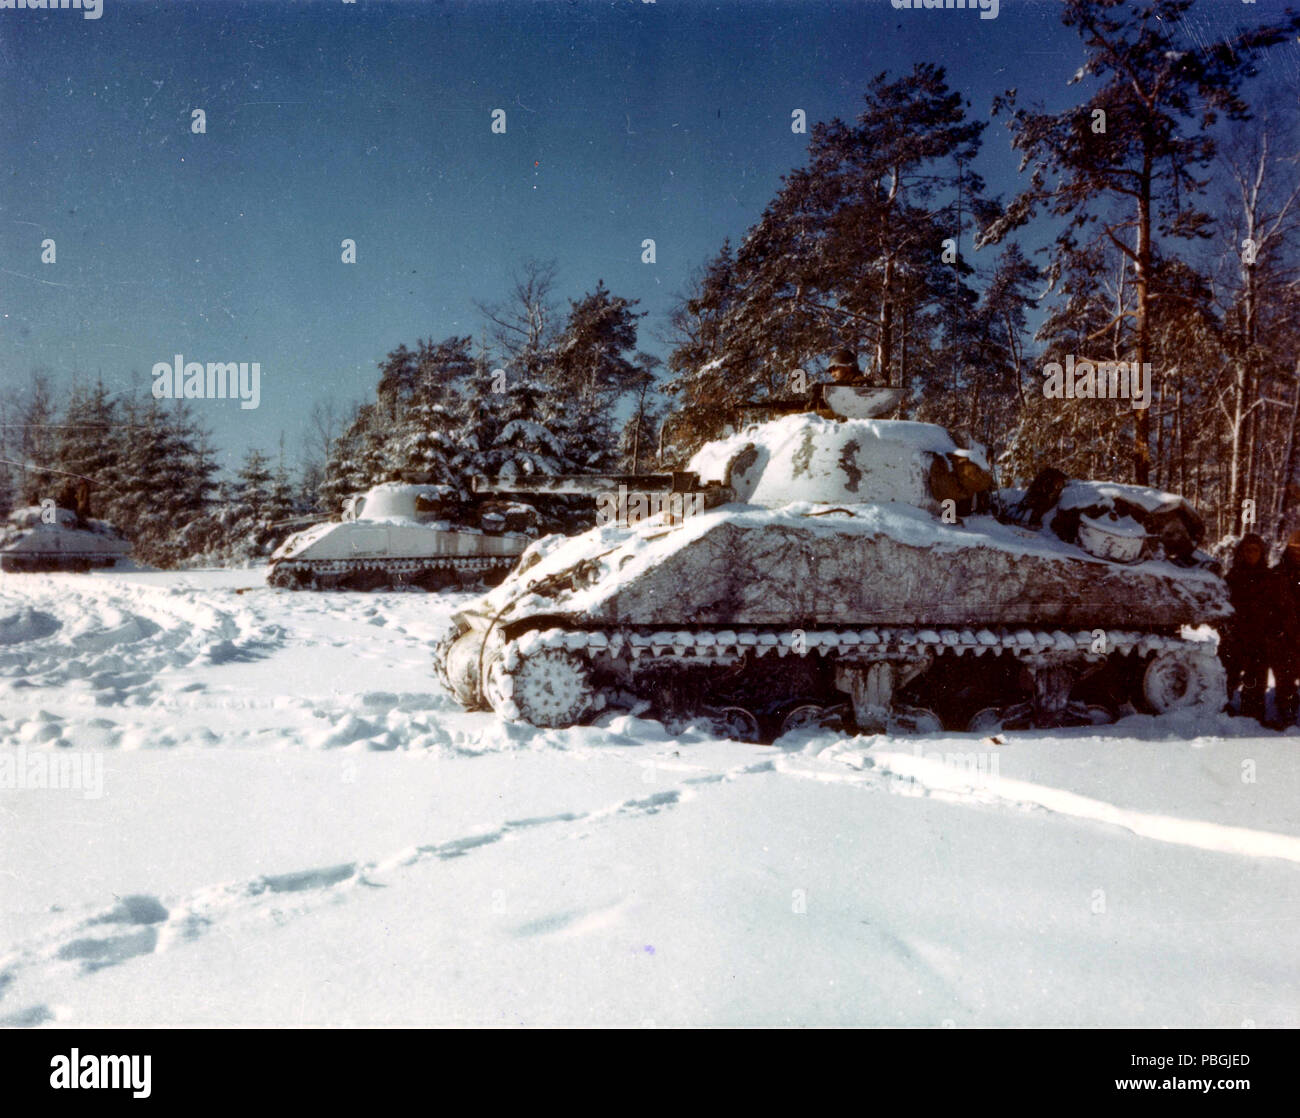 M-4 Sherman Tanks Lined up in a Snow Covered Field, near St. Vith, Belgium Stock Photo